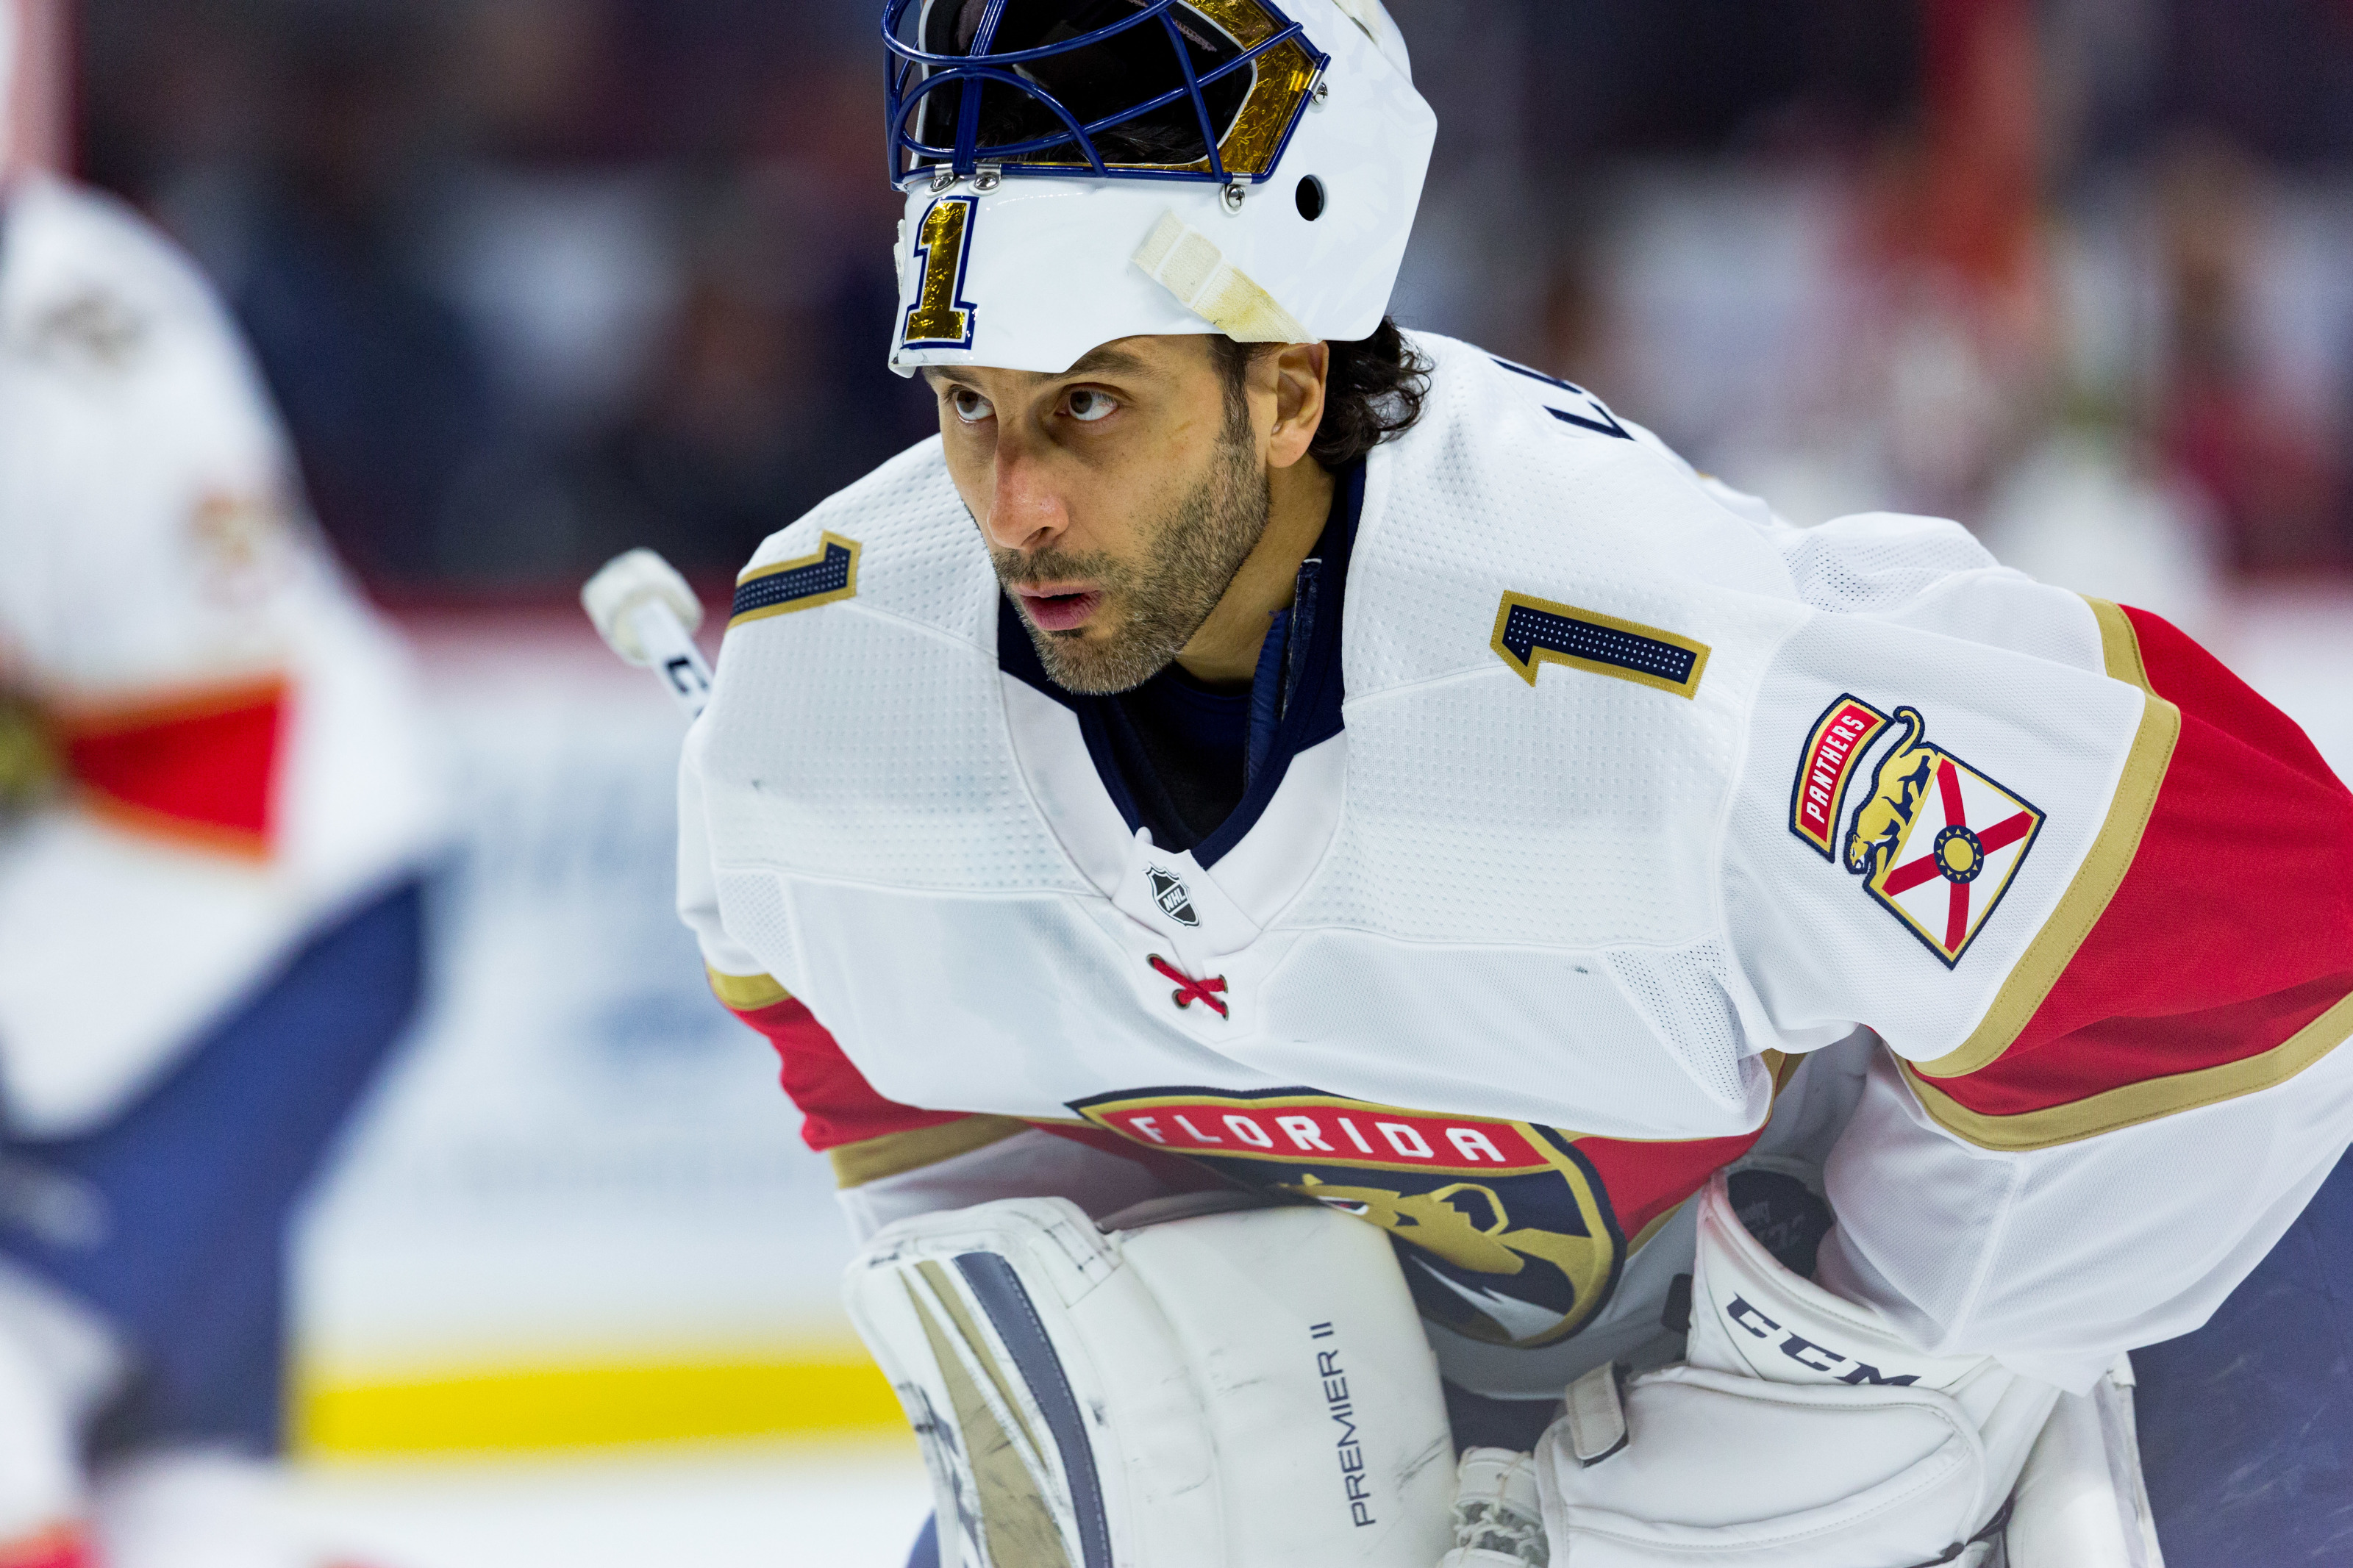 Did Roberto Luongo Deserve to Have his Number Retired by the